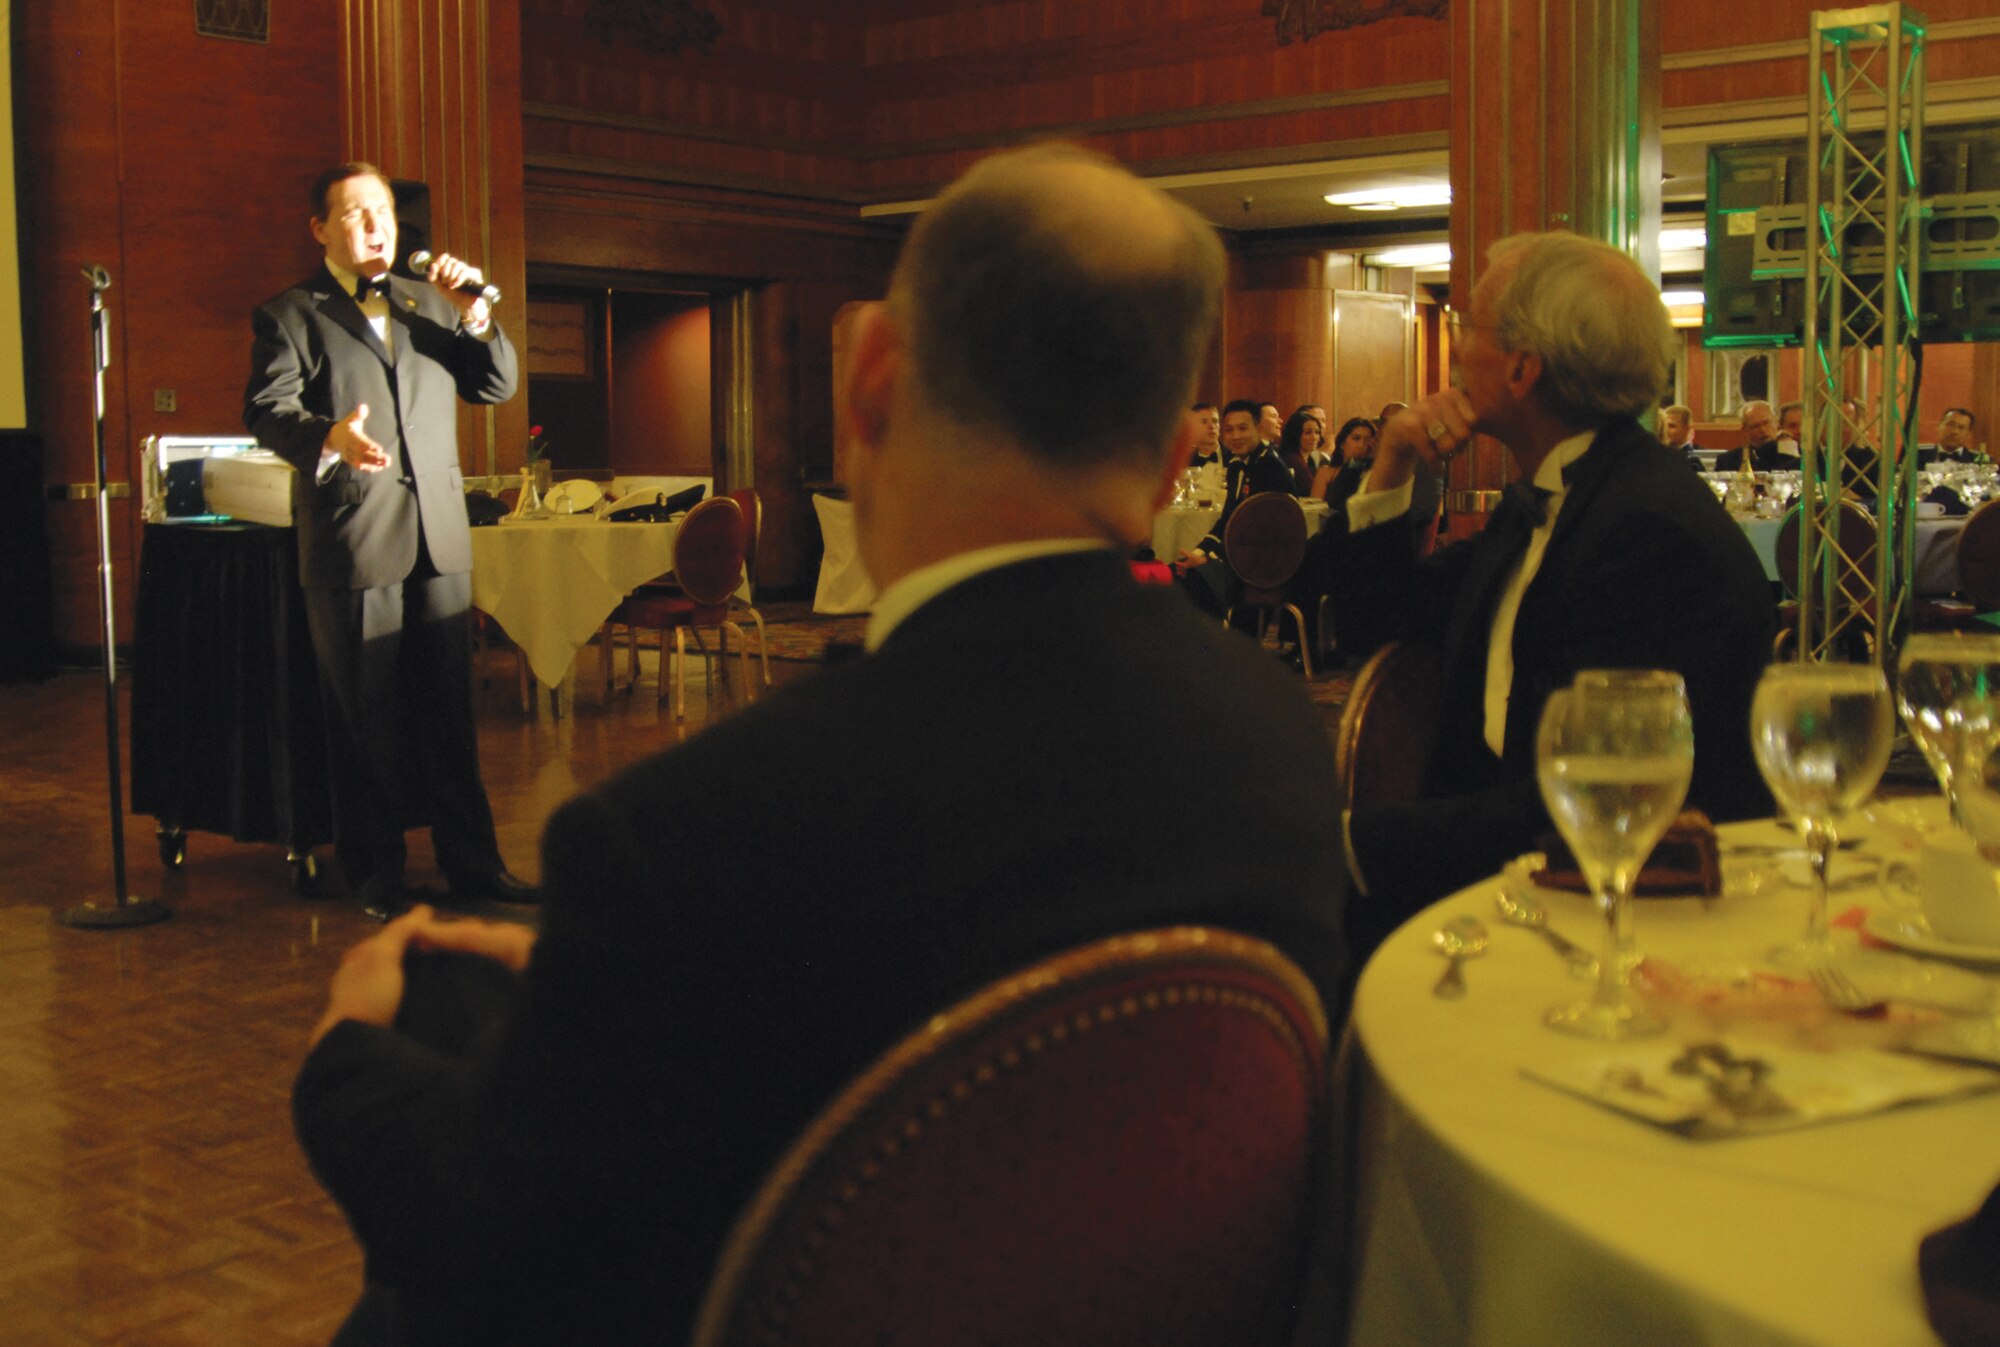 Hollywood entertainer and impersonator, Fred Travalena, captures the audiences attention at the GPS Dining Out. (photo by Joe Juarez)